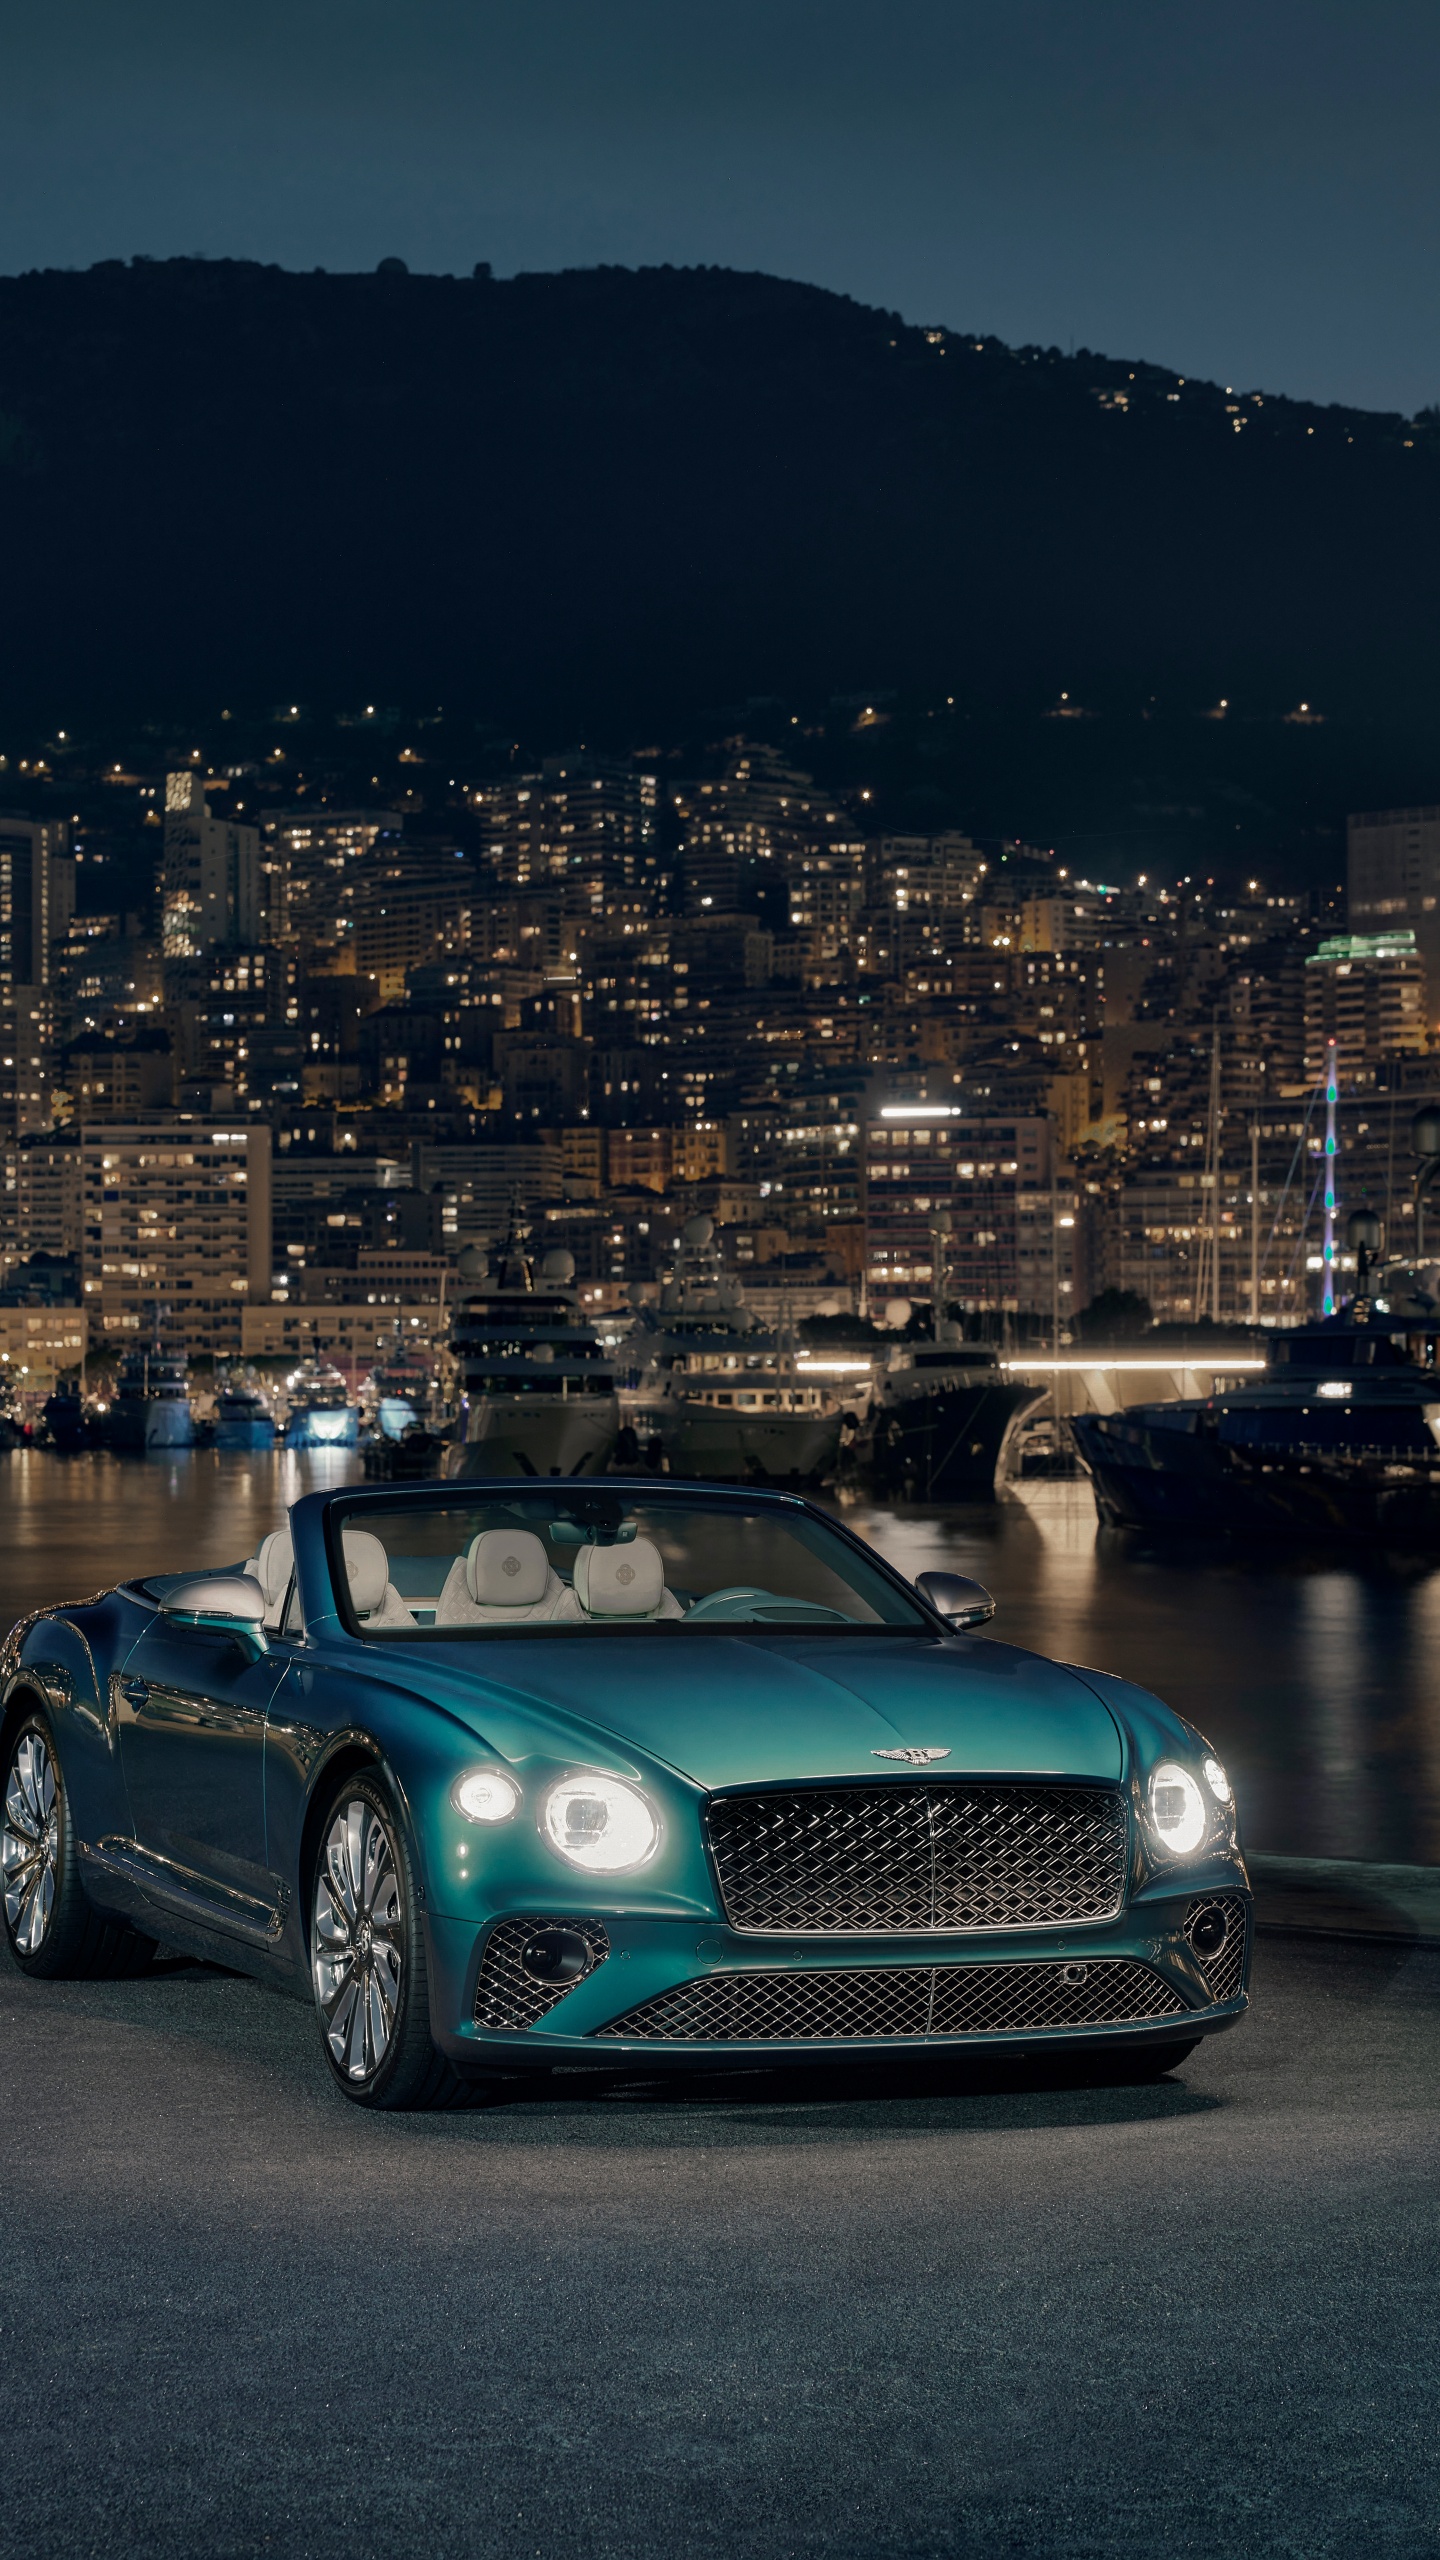 Download Bentley wallpapers for mobile phone free Bentley HD pictures